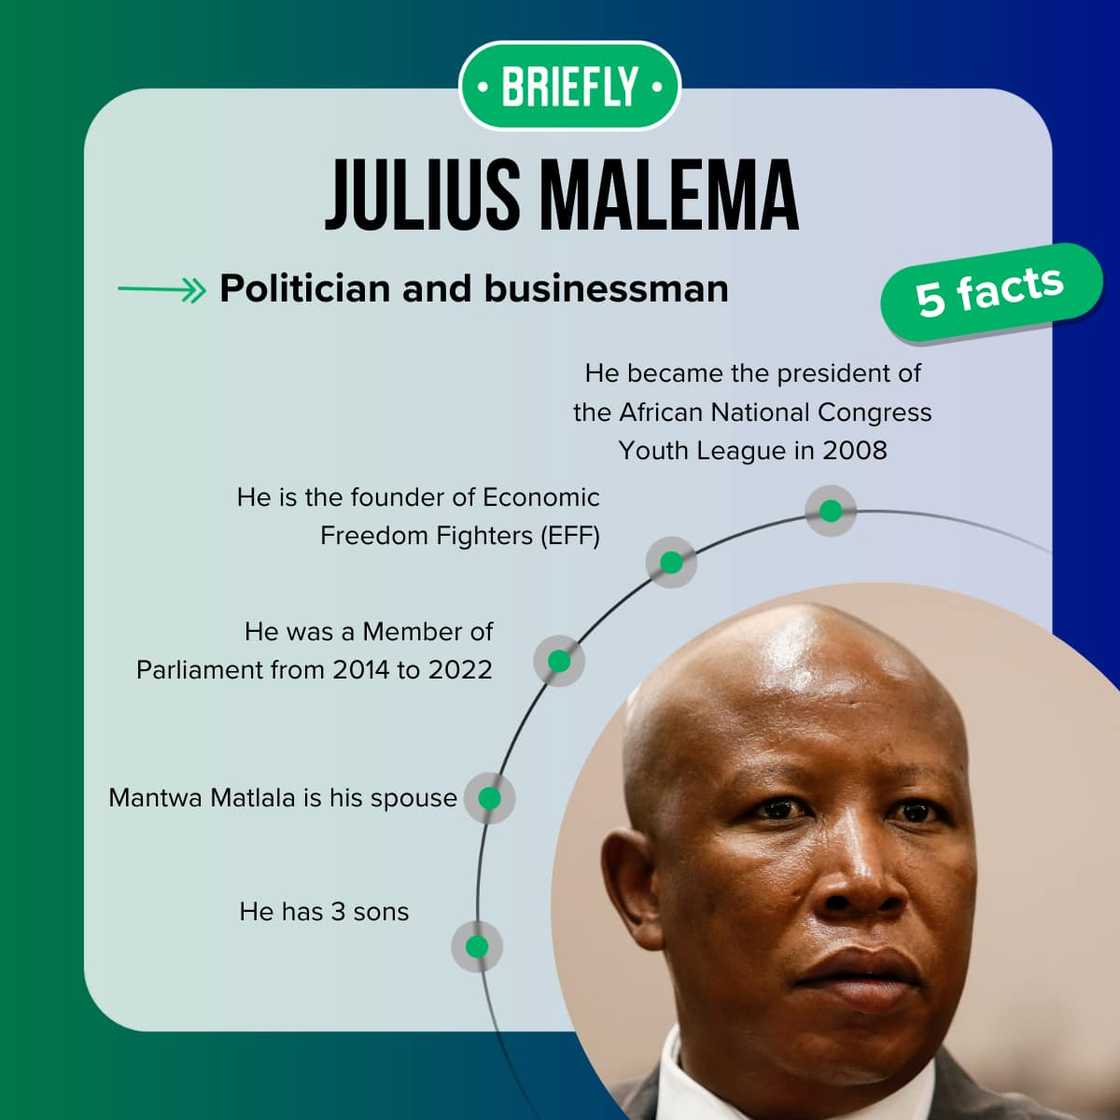 Top-5 facts about Julius Malema